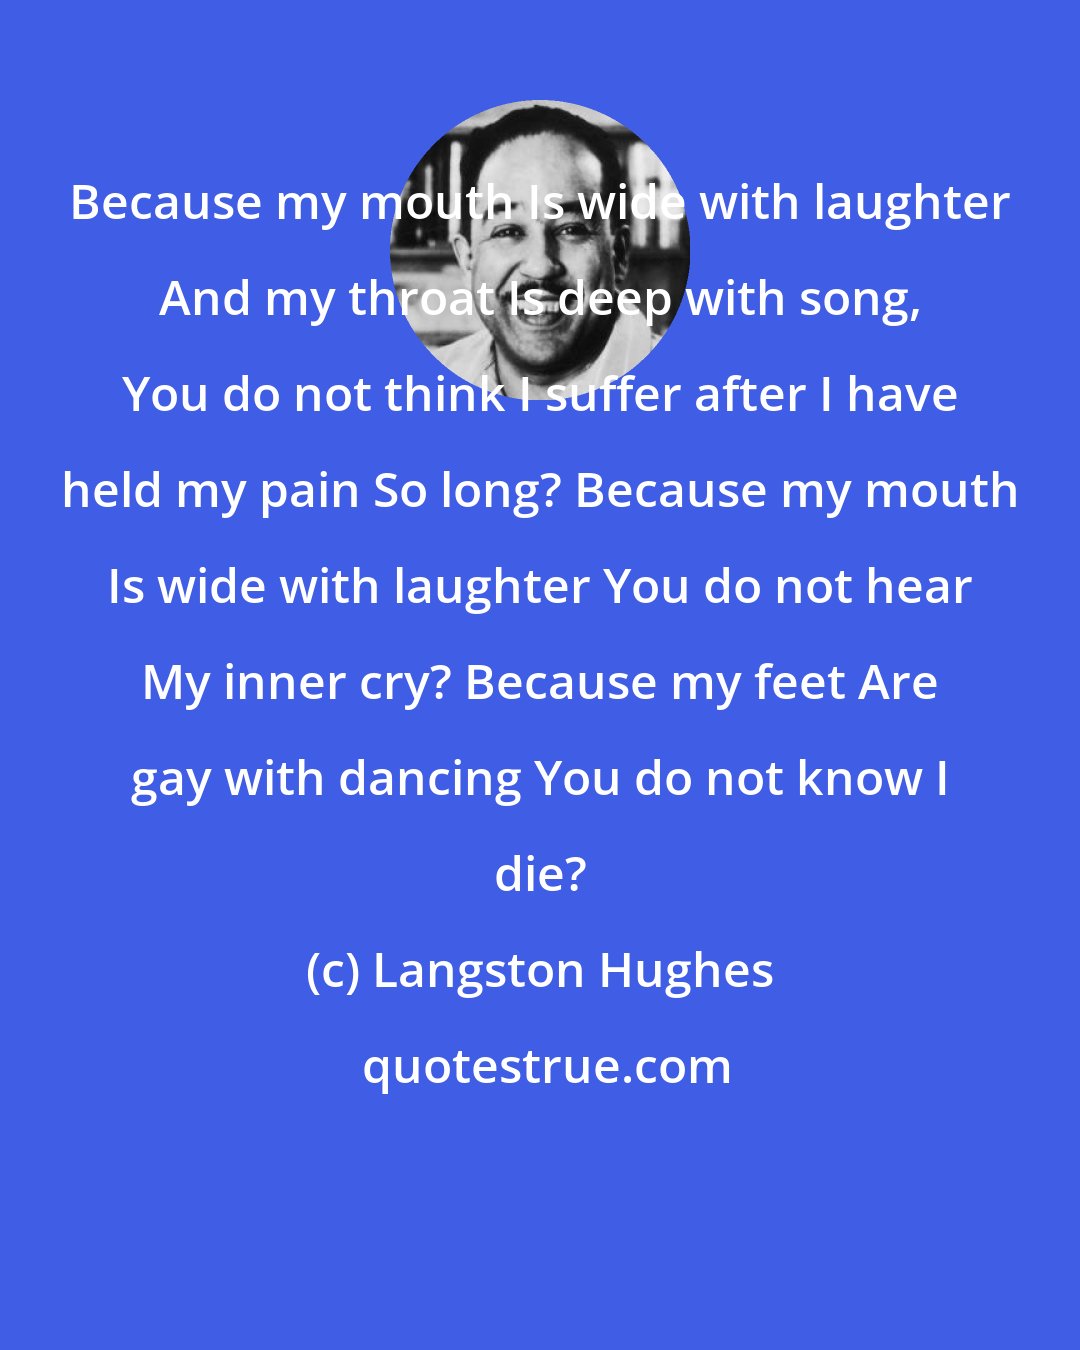 Langston Hughes: Because my mouth Is wide with laughter And my throat Is deep with song, You do not think I suffer after I have held my pain So long? Because my mouth Is wide with laughter You do not hear My inner cry? Because my feet Are gay with dancing You do not know I die?